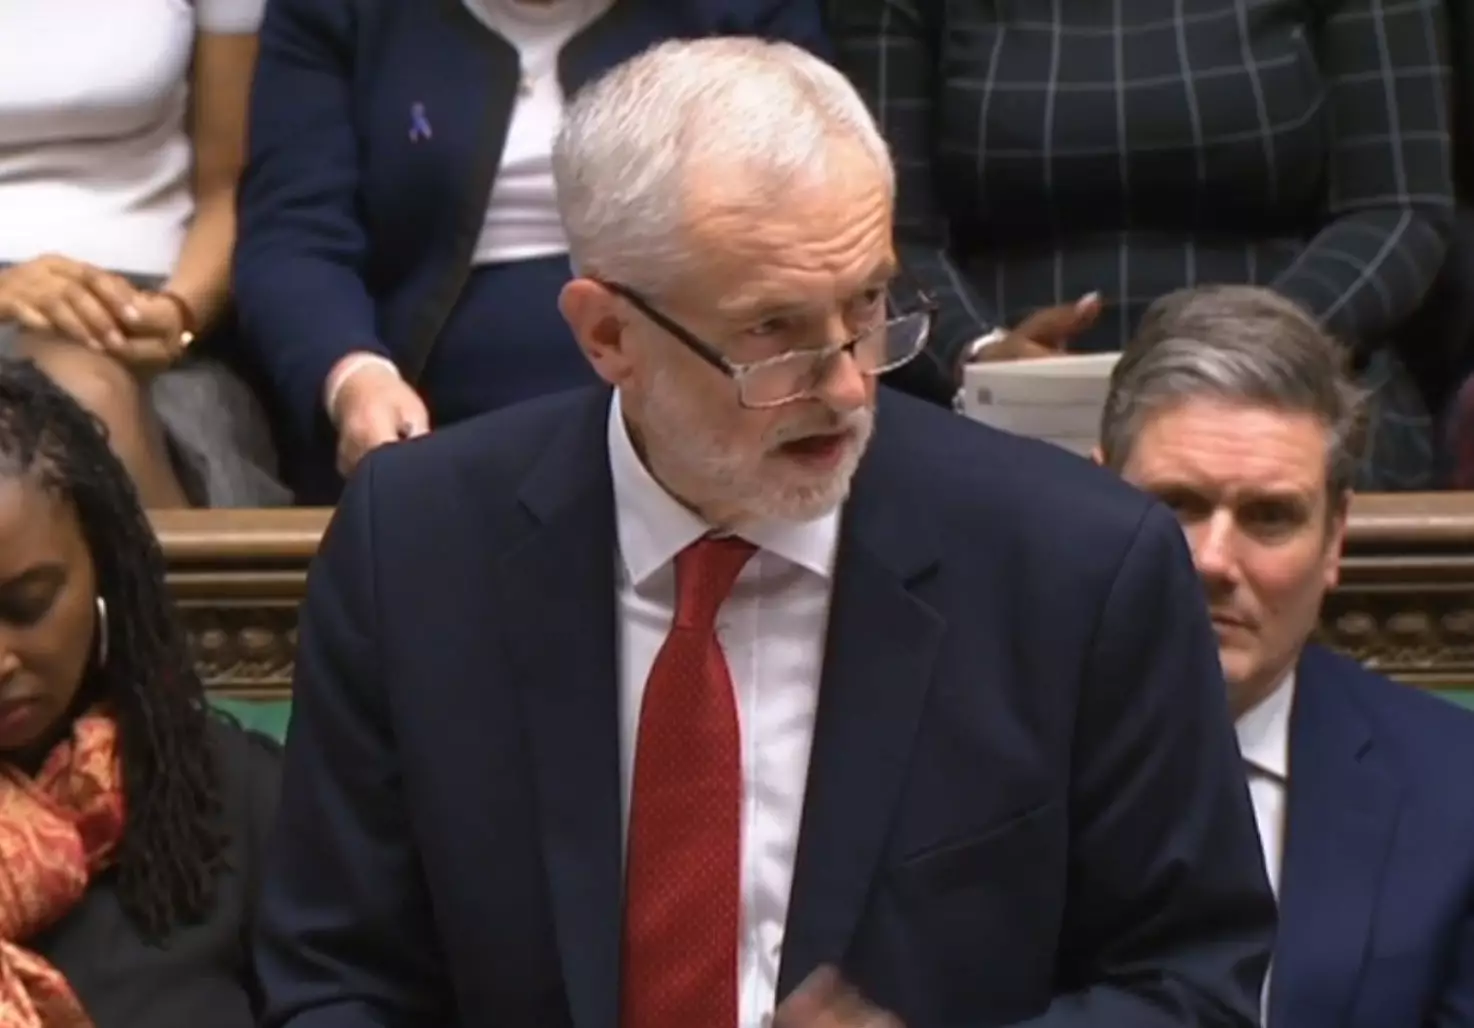 Jeremy Corbyn has declared a motion of no confidence in Theresa May's government.